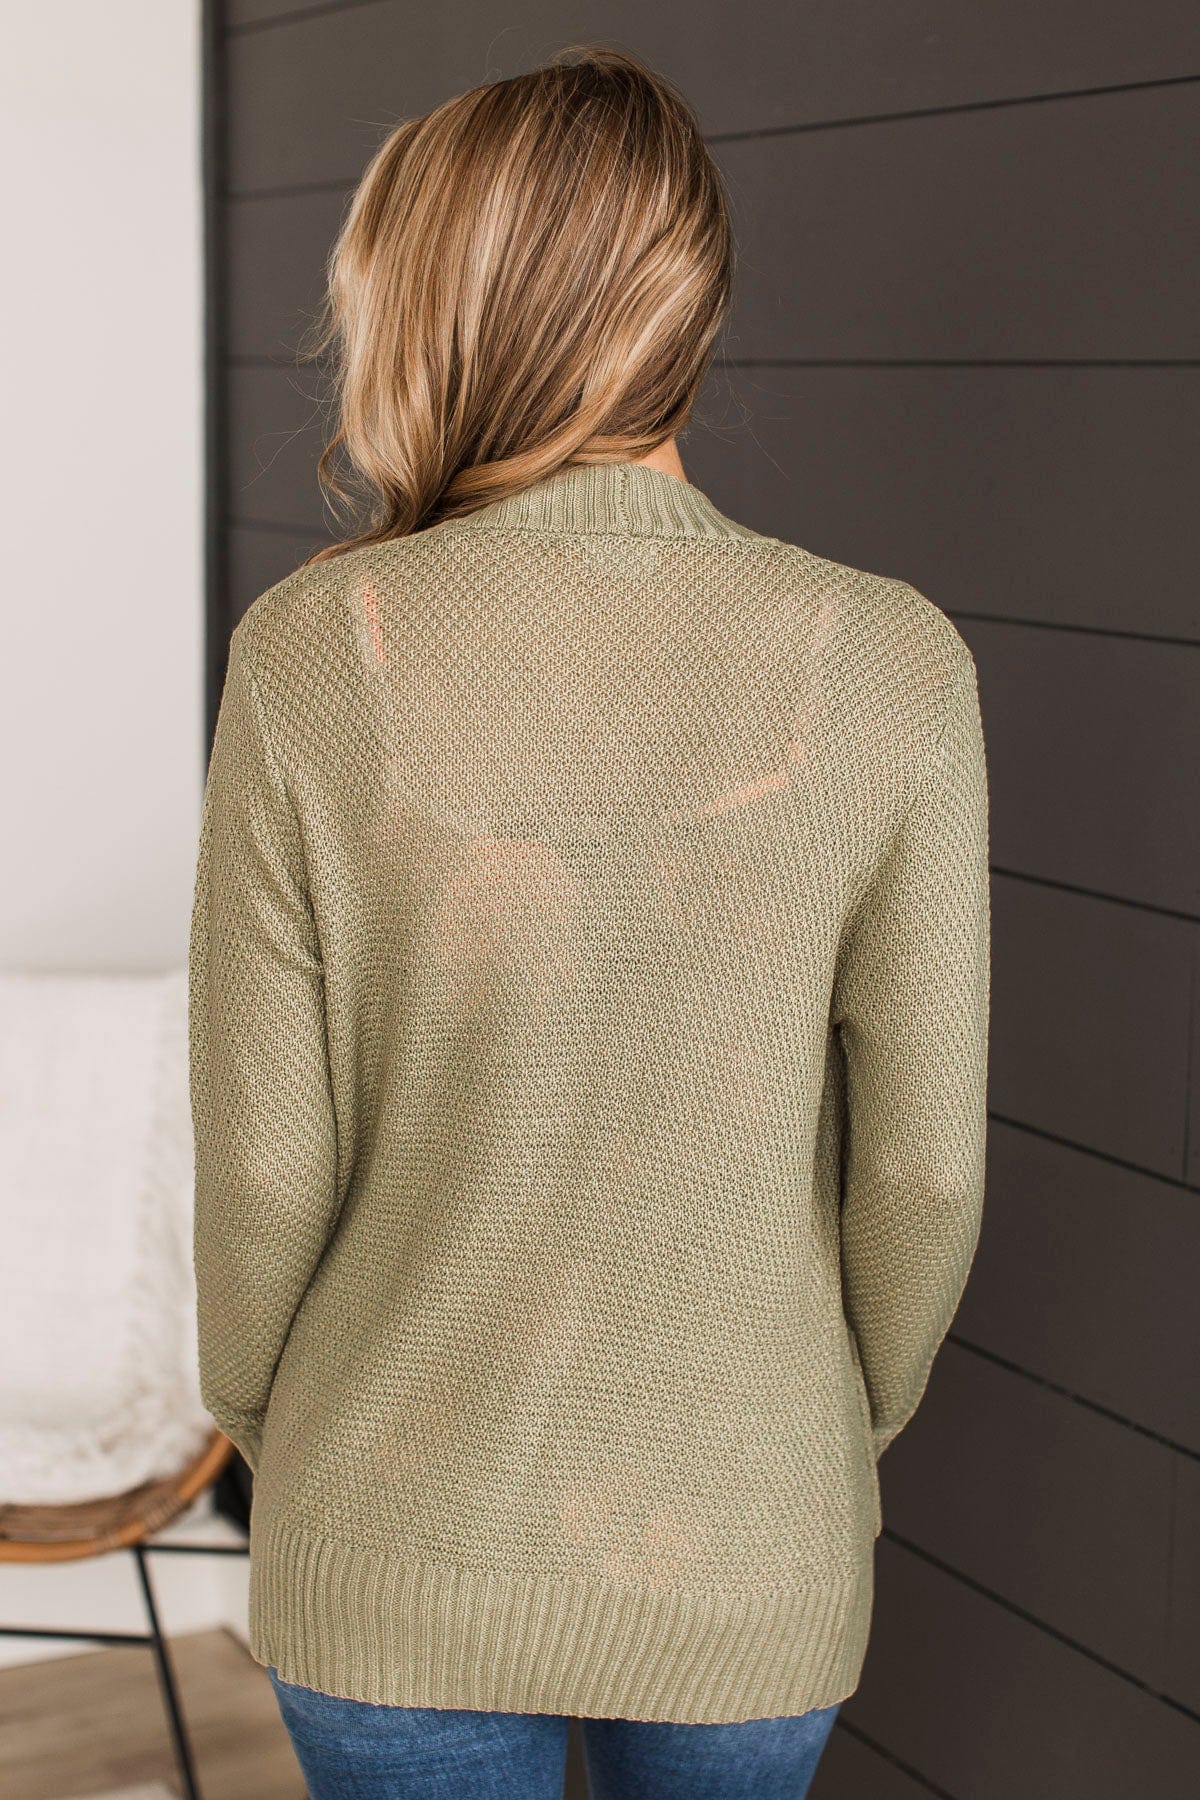 Welcoming To You Knitted Cardigan- Light Olive